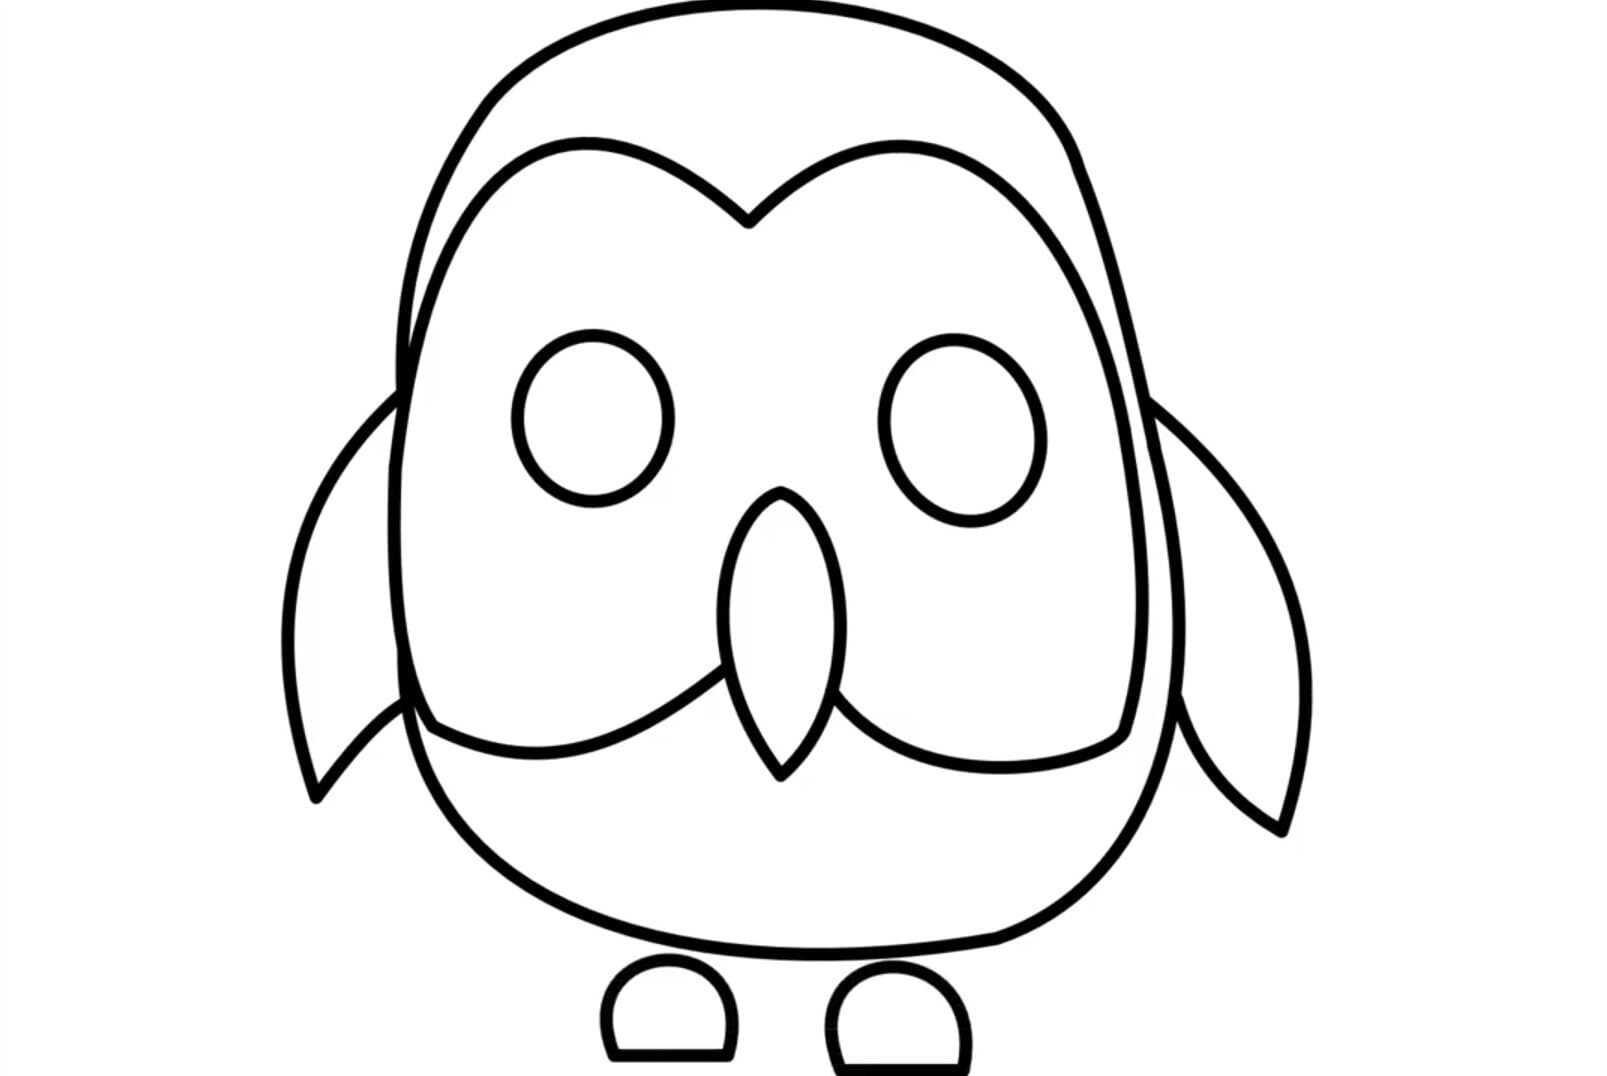 The Owl From Adopt Me Allows A Player To Ride On Its Head Coloring Pages